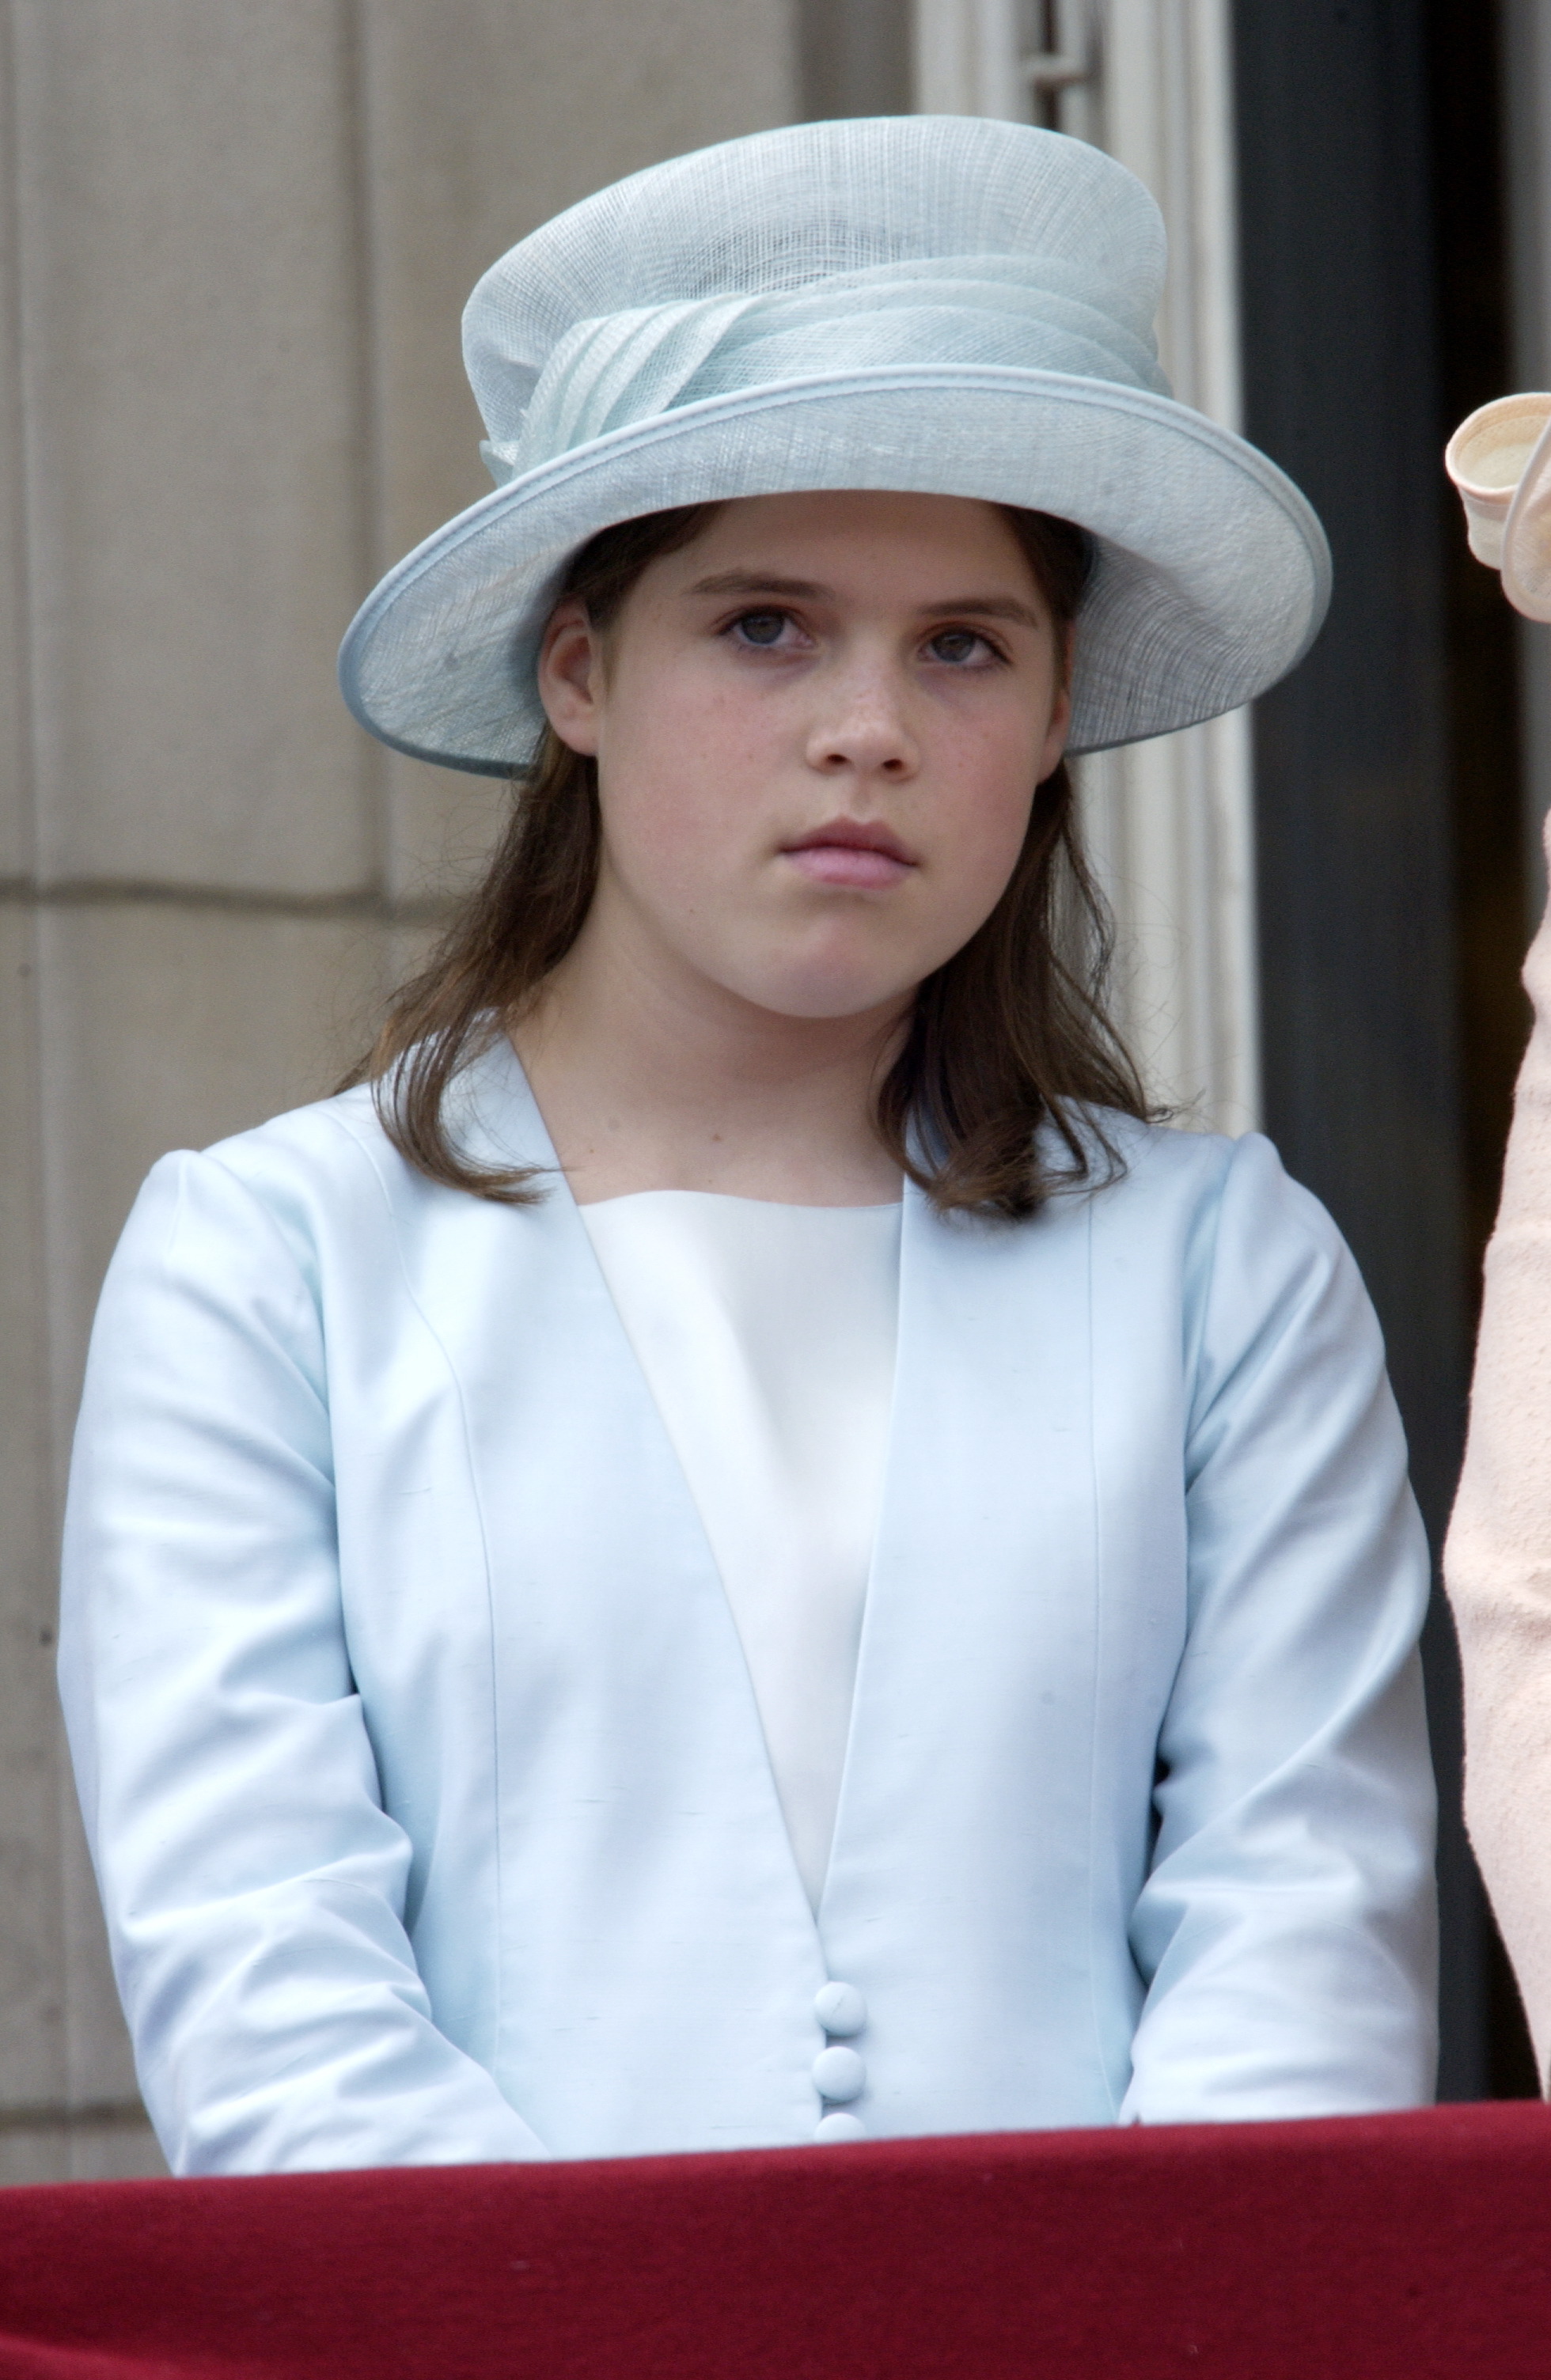 Princess Eugenie looks serious as she watches the Trooping the Colour parade from the balcony of Buckingham Palace in June 2002. | Source: Getty Images